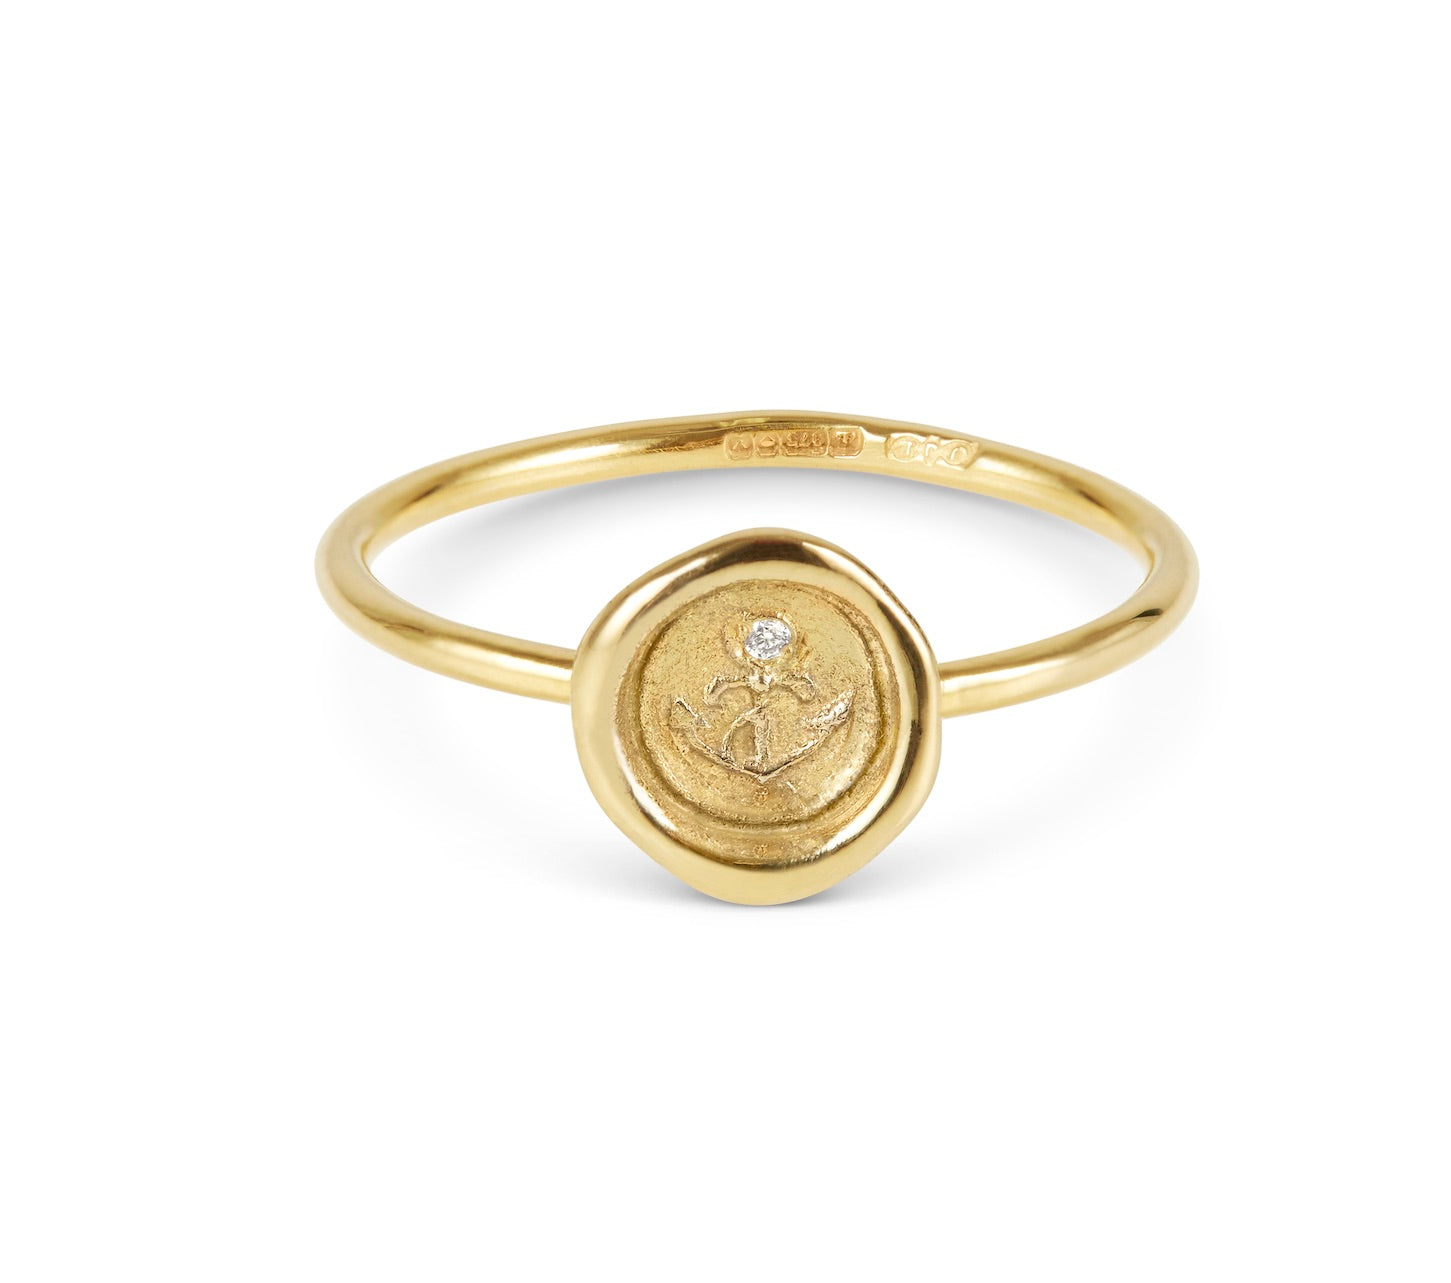 Petites Faith-Hope-Charity Wax Seal Stacking Rings